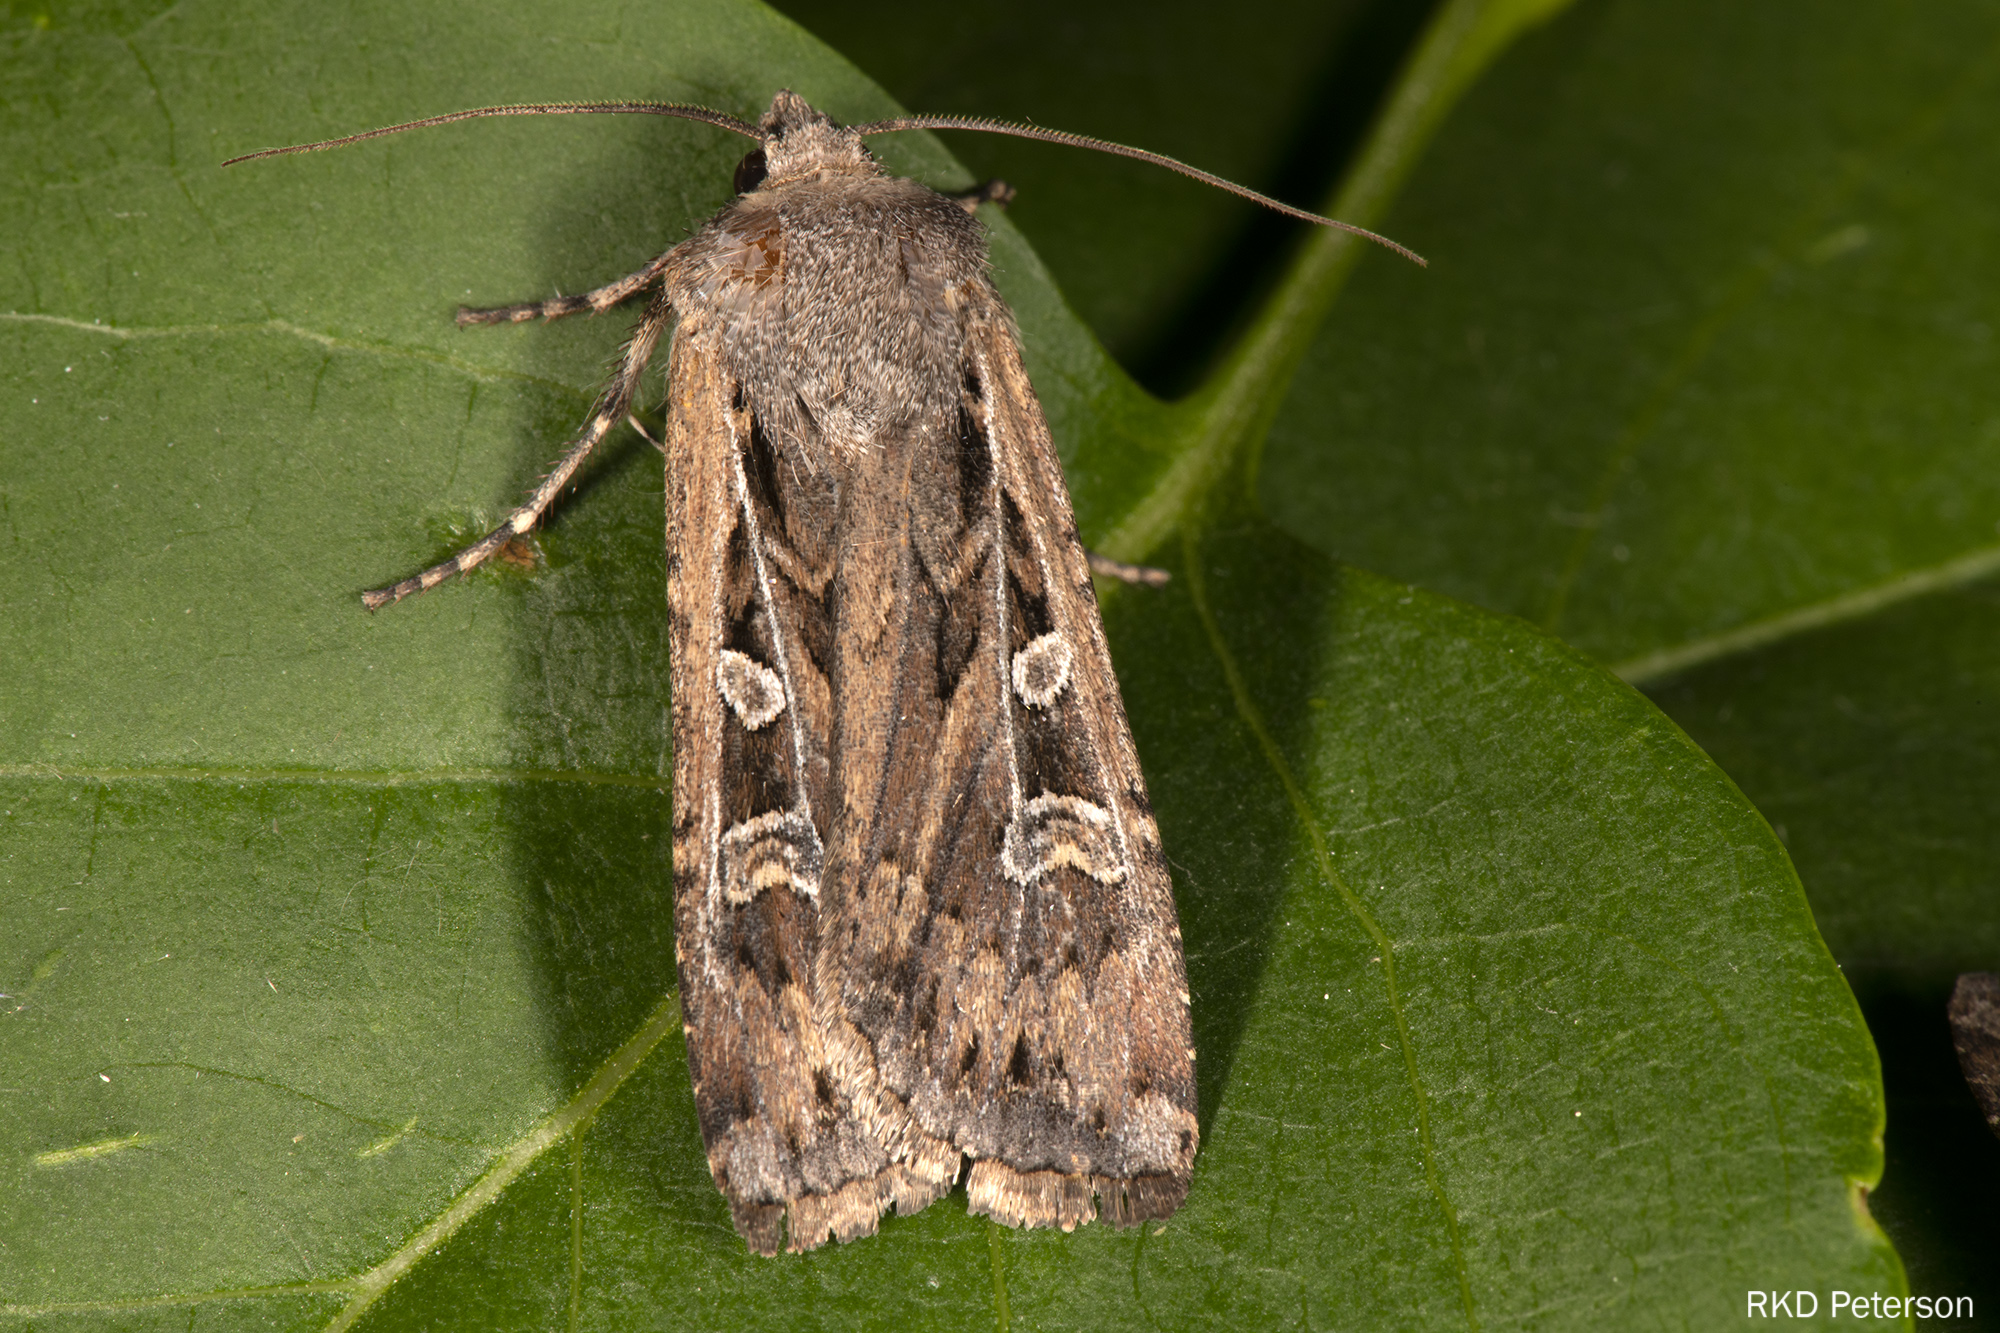 This photo shows an image of an adult army cutworm with its brown wings and spots.